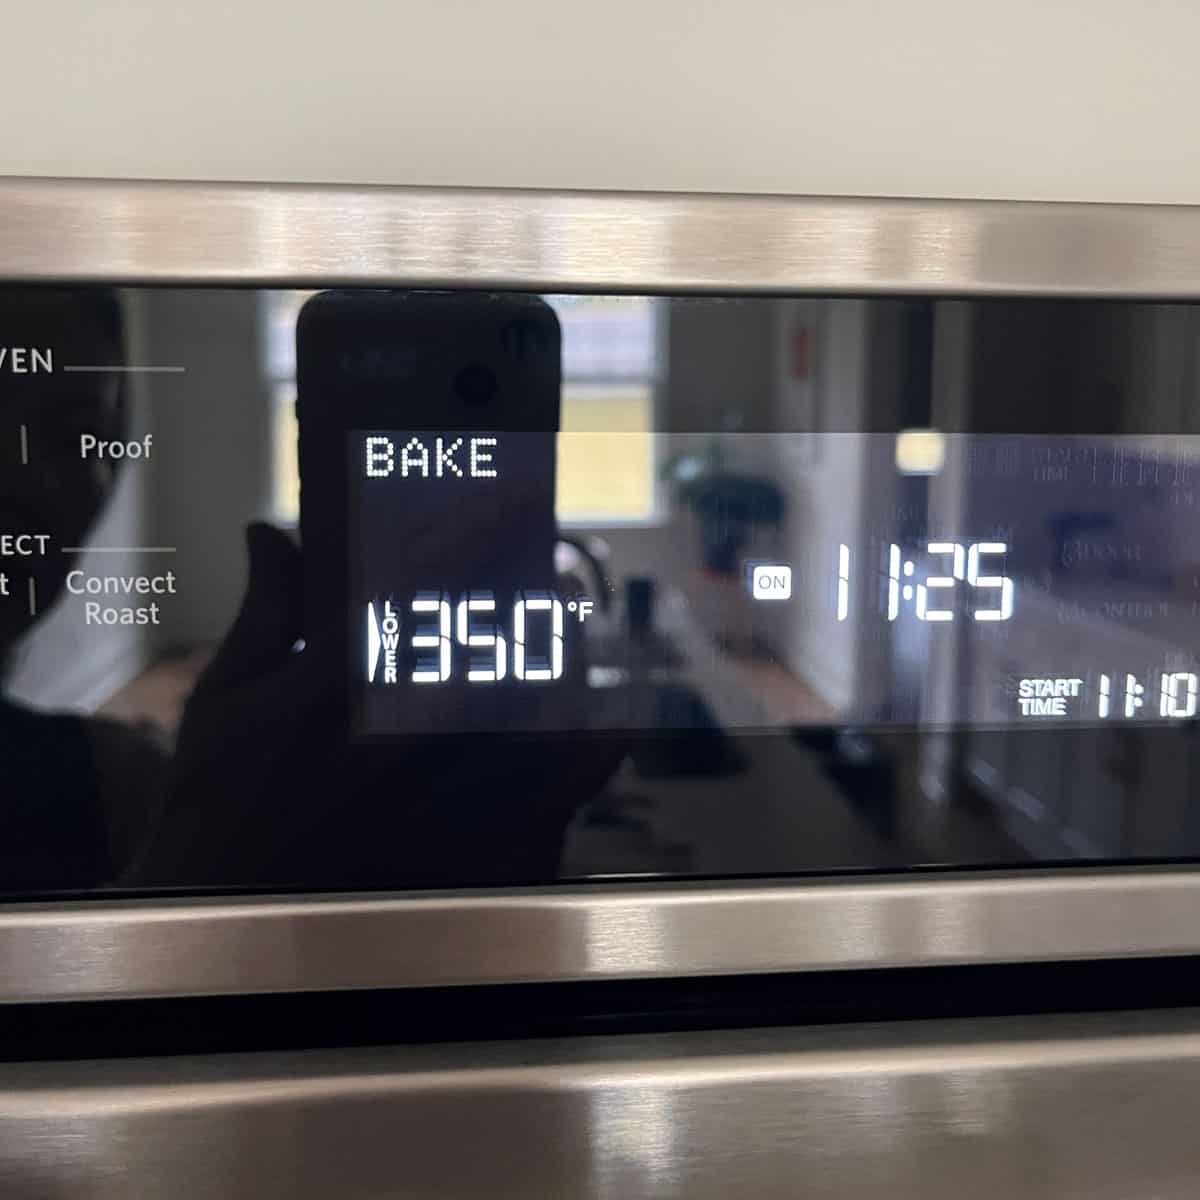 Oven preheated to 350°F.